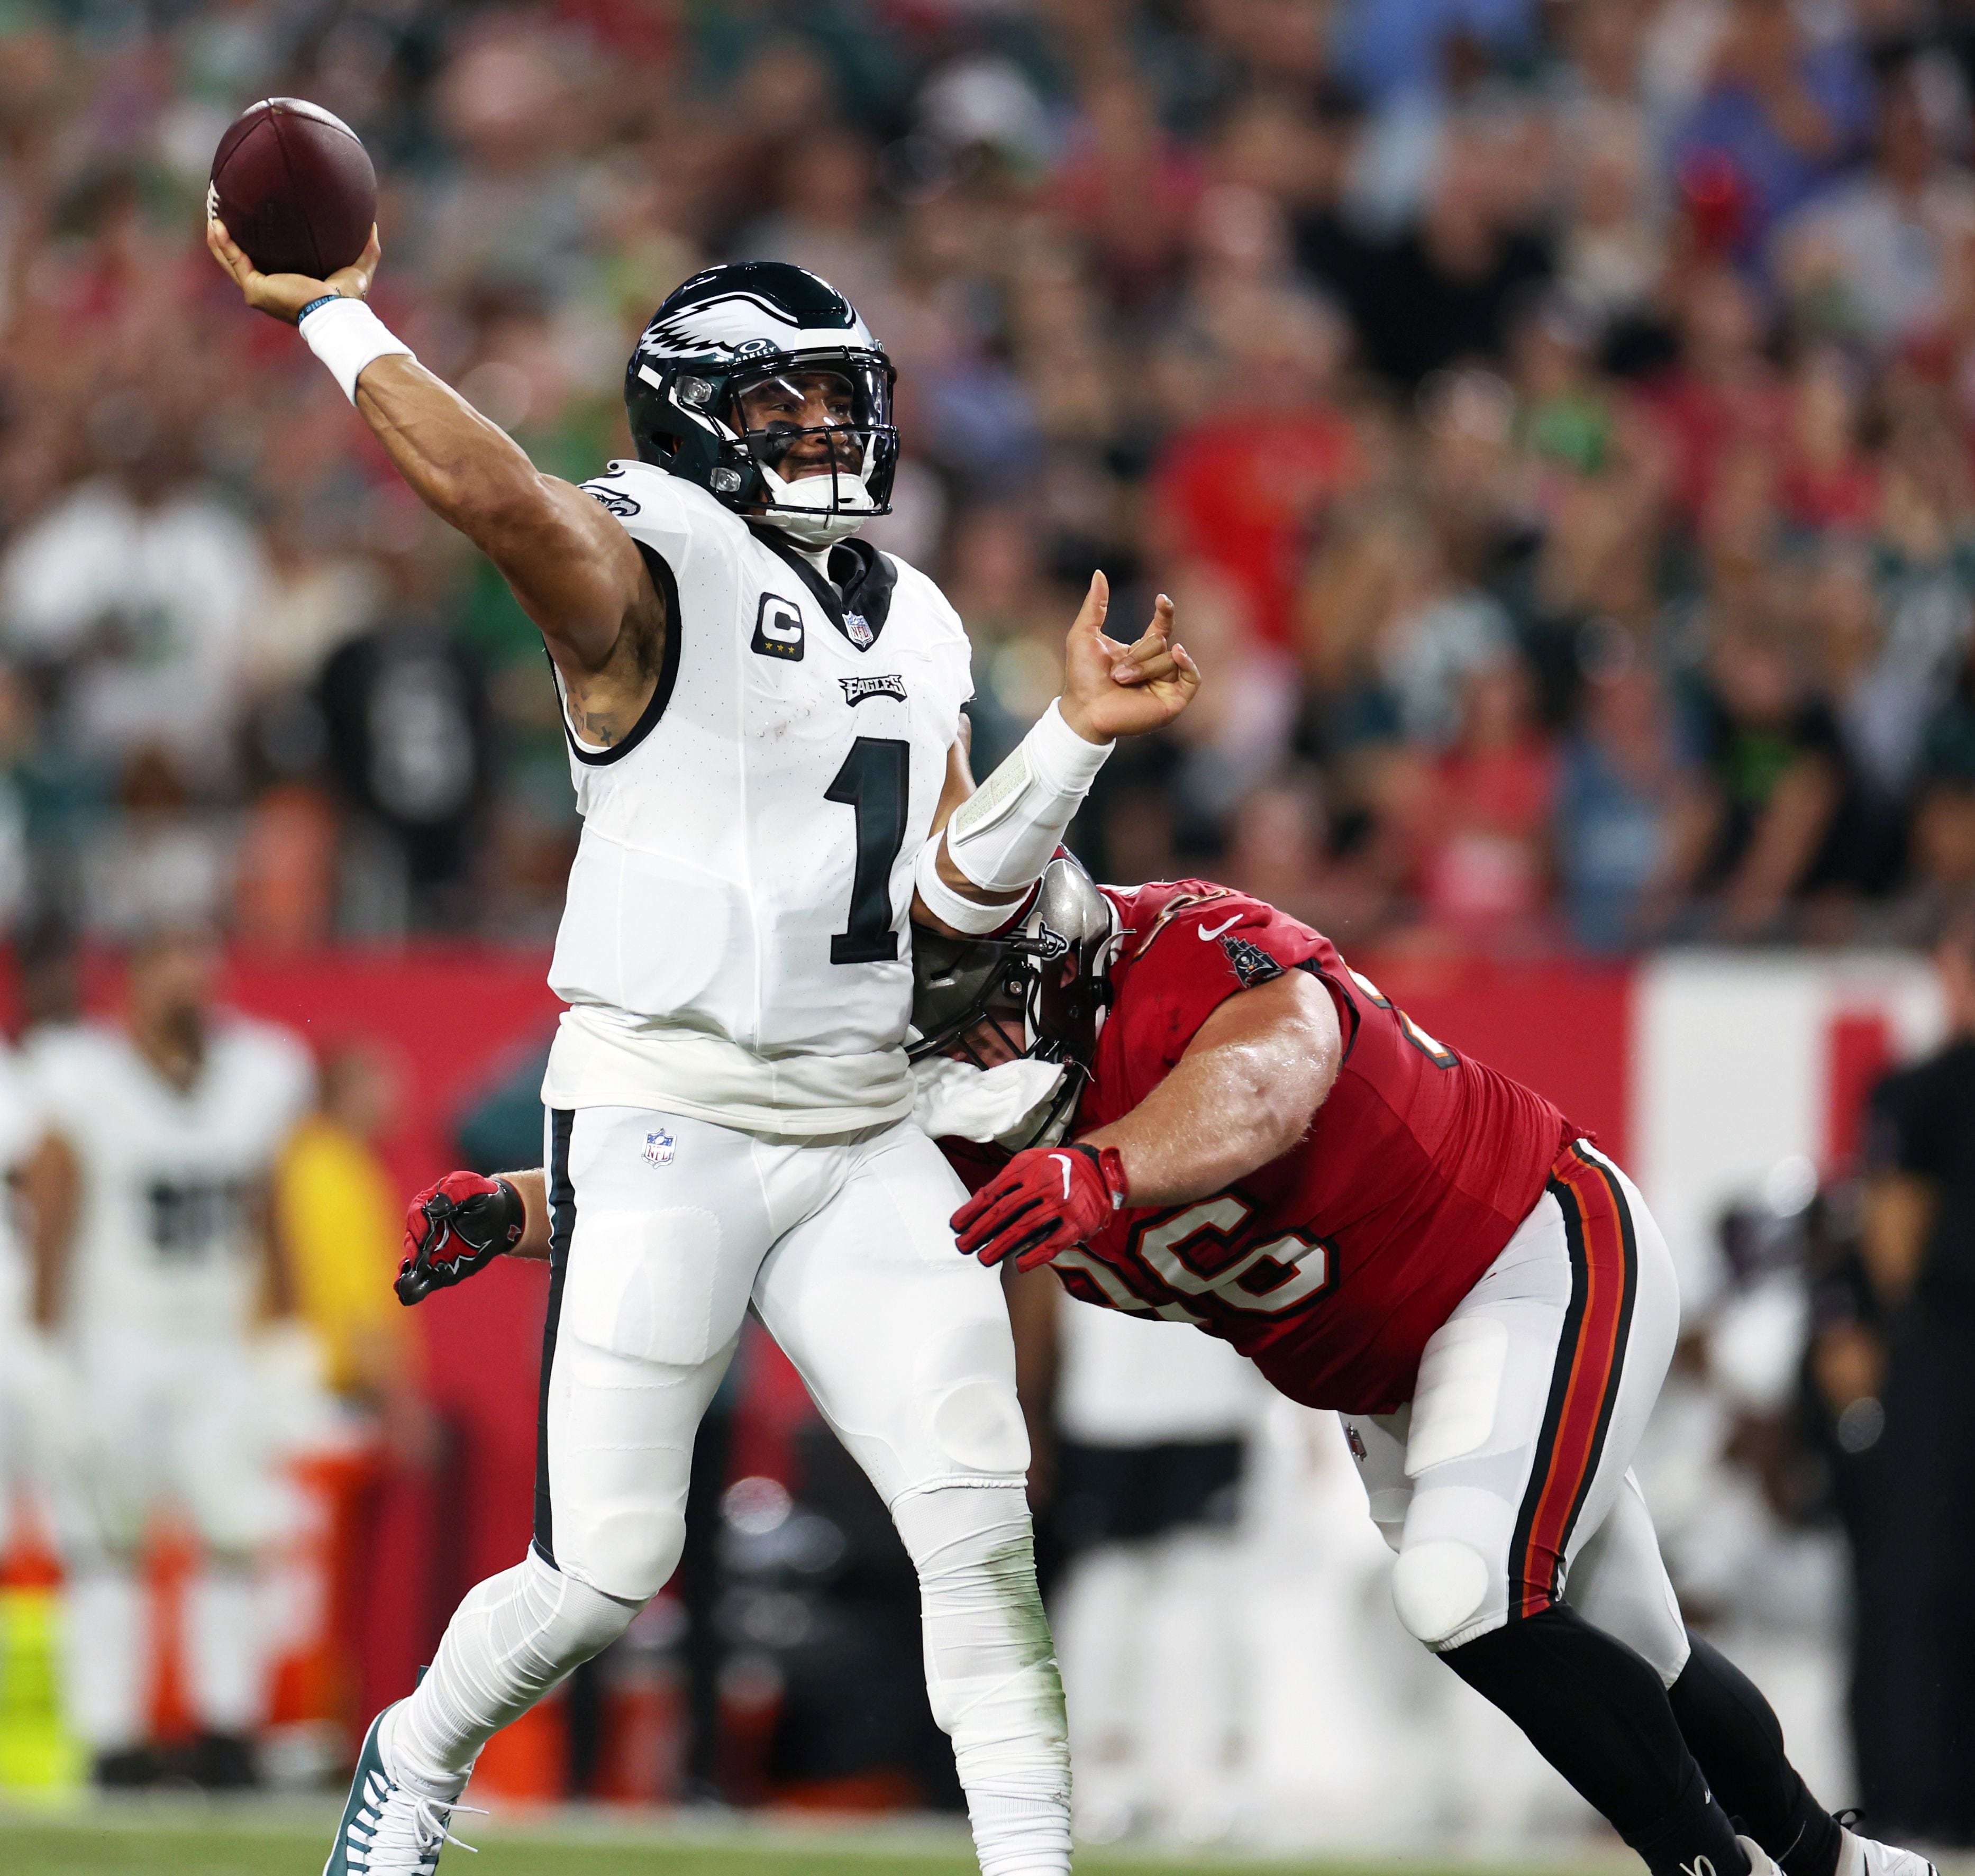 Eagles improve to 3-0 with dominant win over Buccaneers - NBC Sports